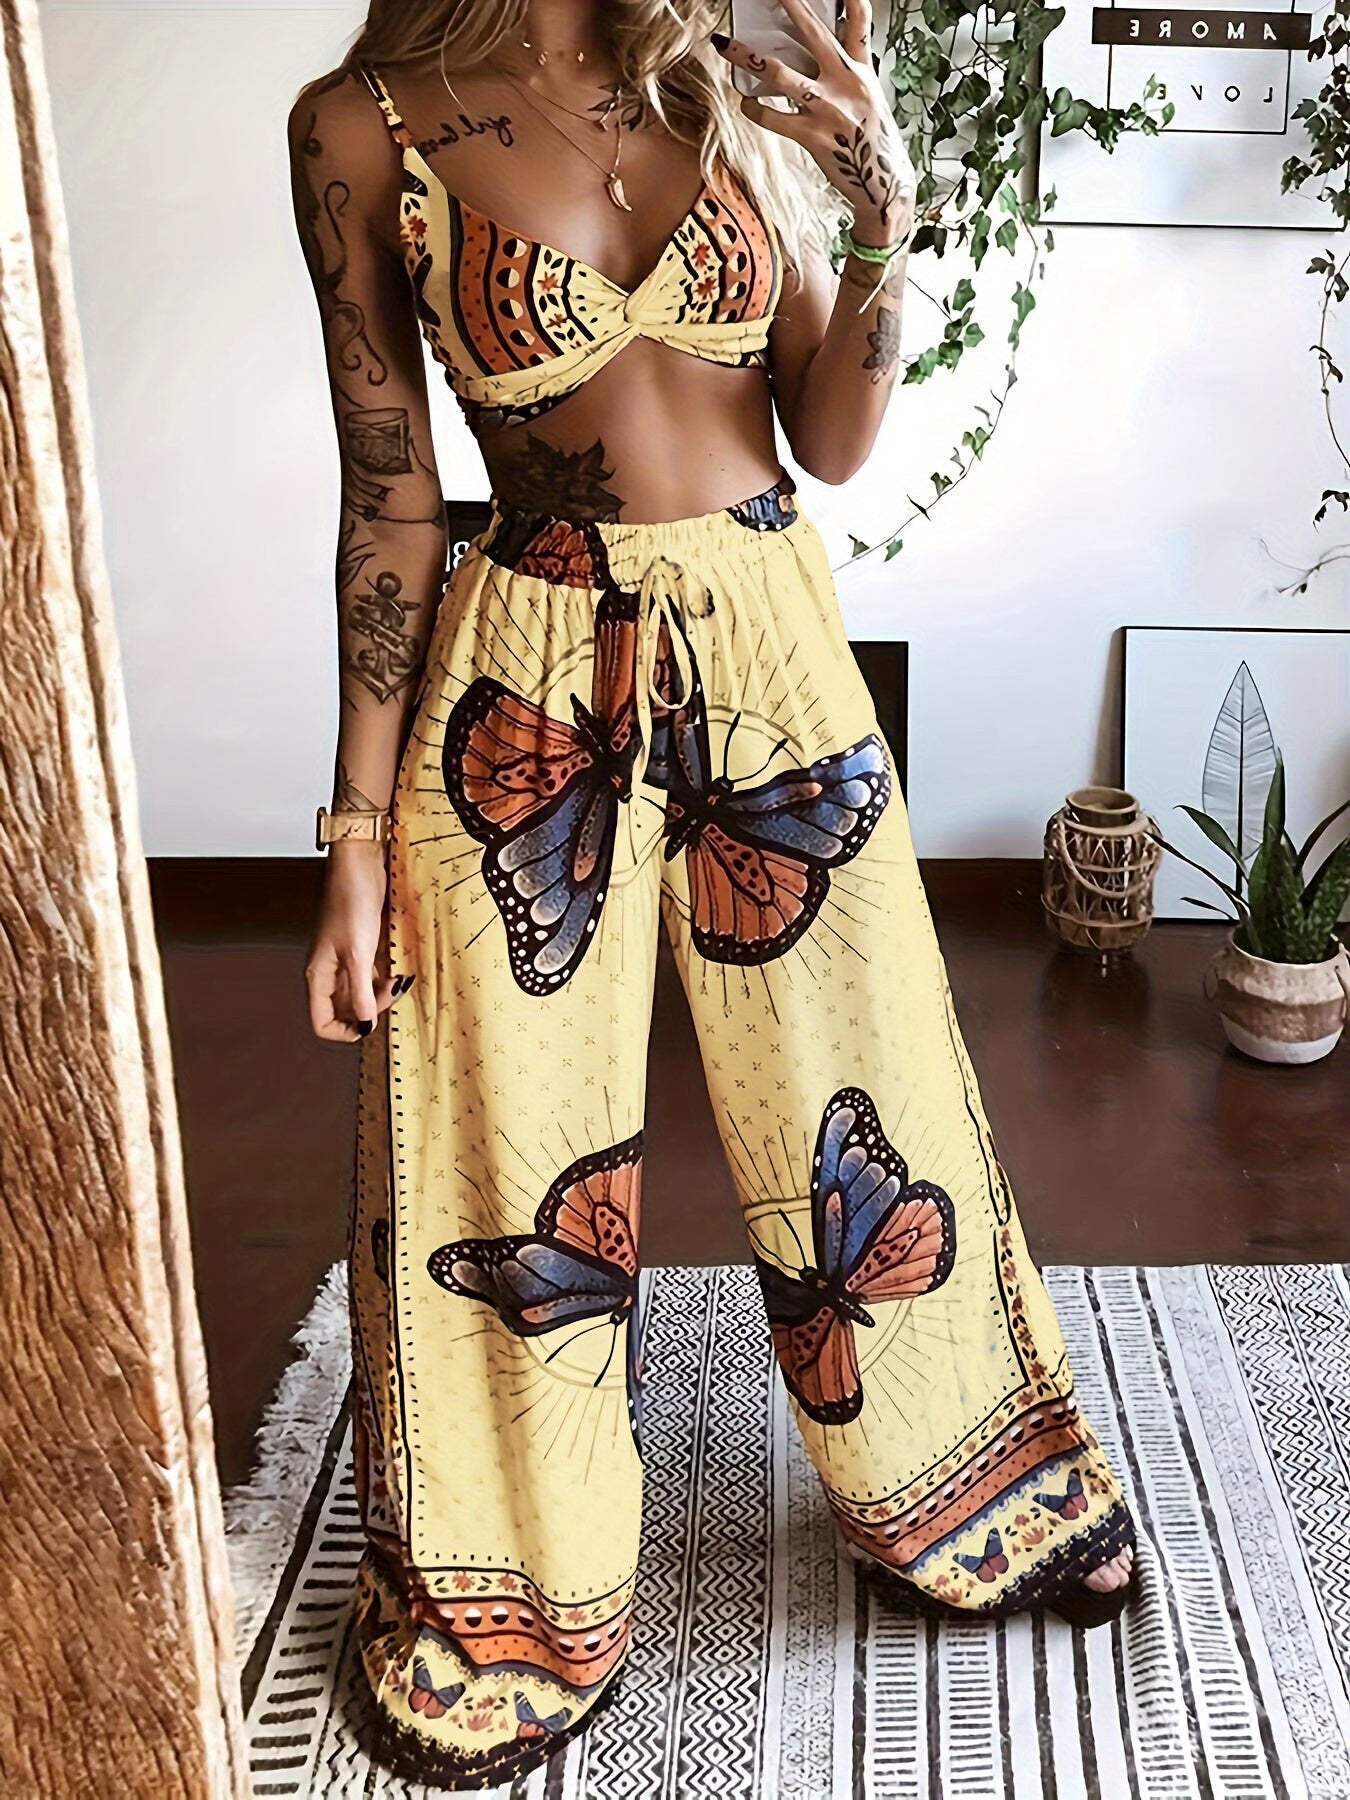 Girlfairy - Boho Butterfly Print Two-piece Set, Crop Cami Top & Wide Leg Pants Outfits, Women's Clothing